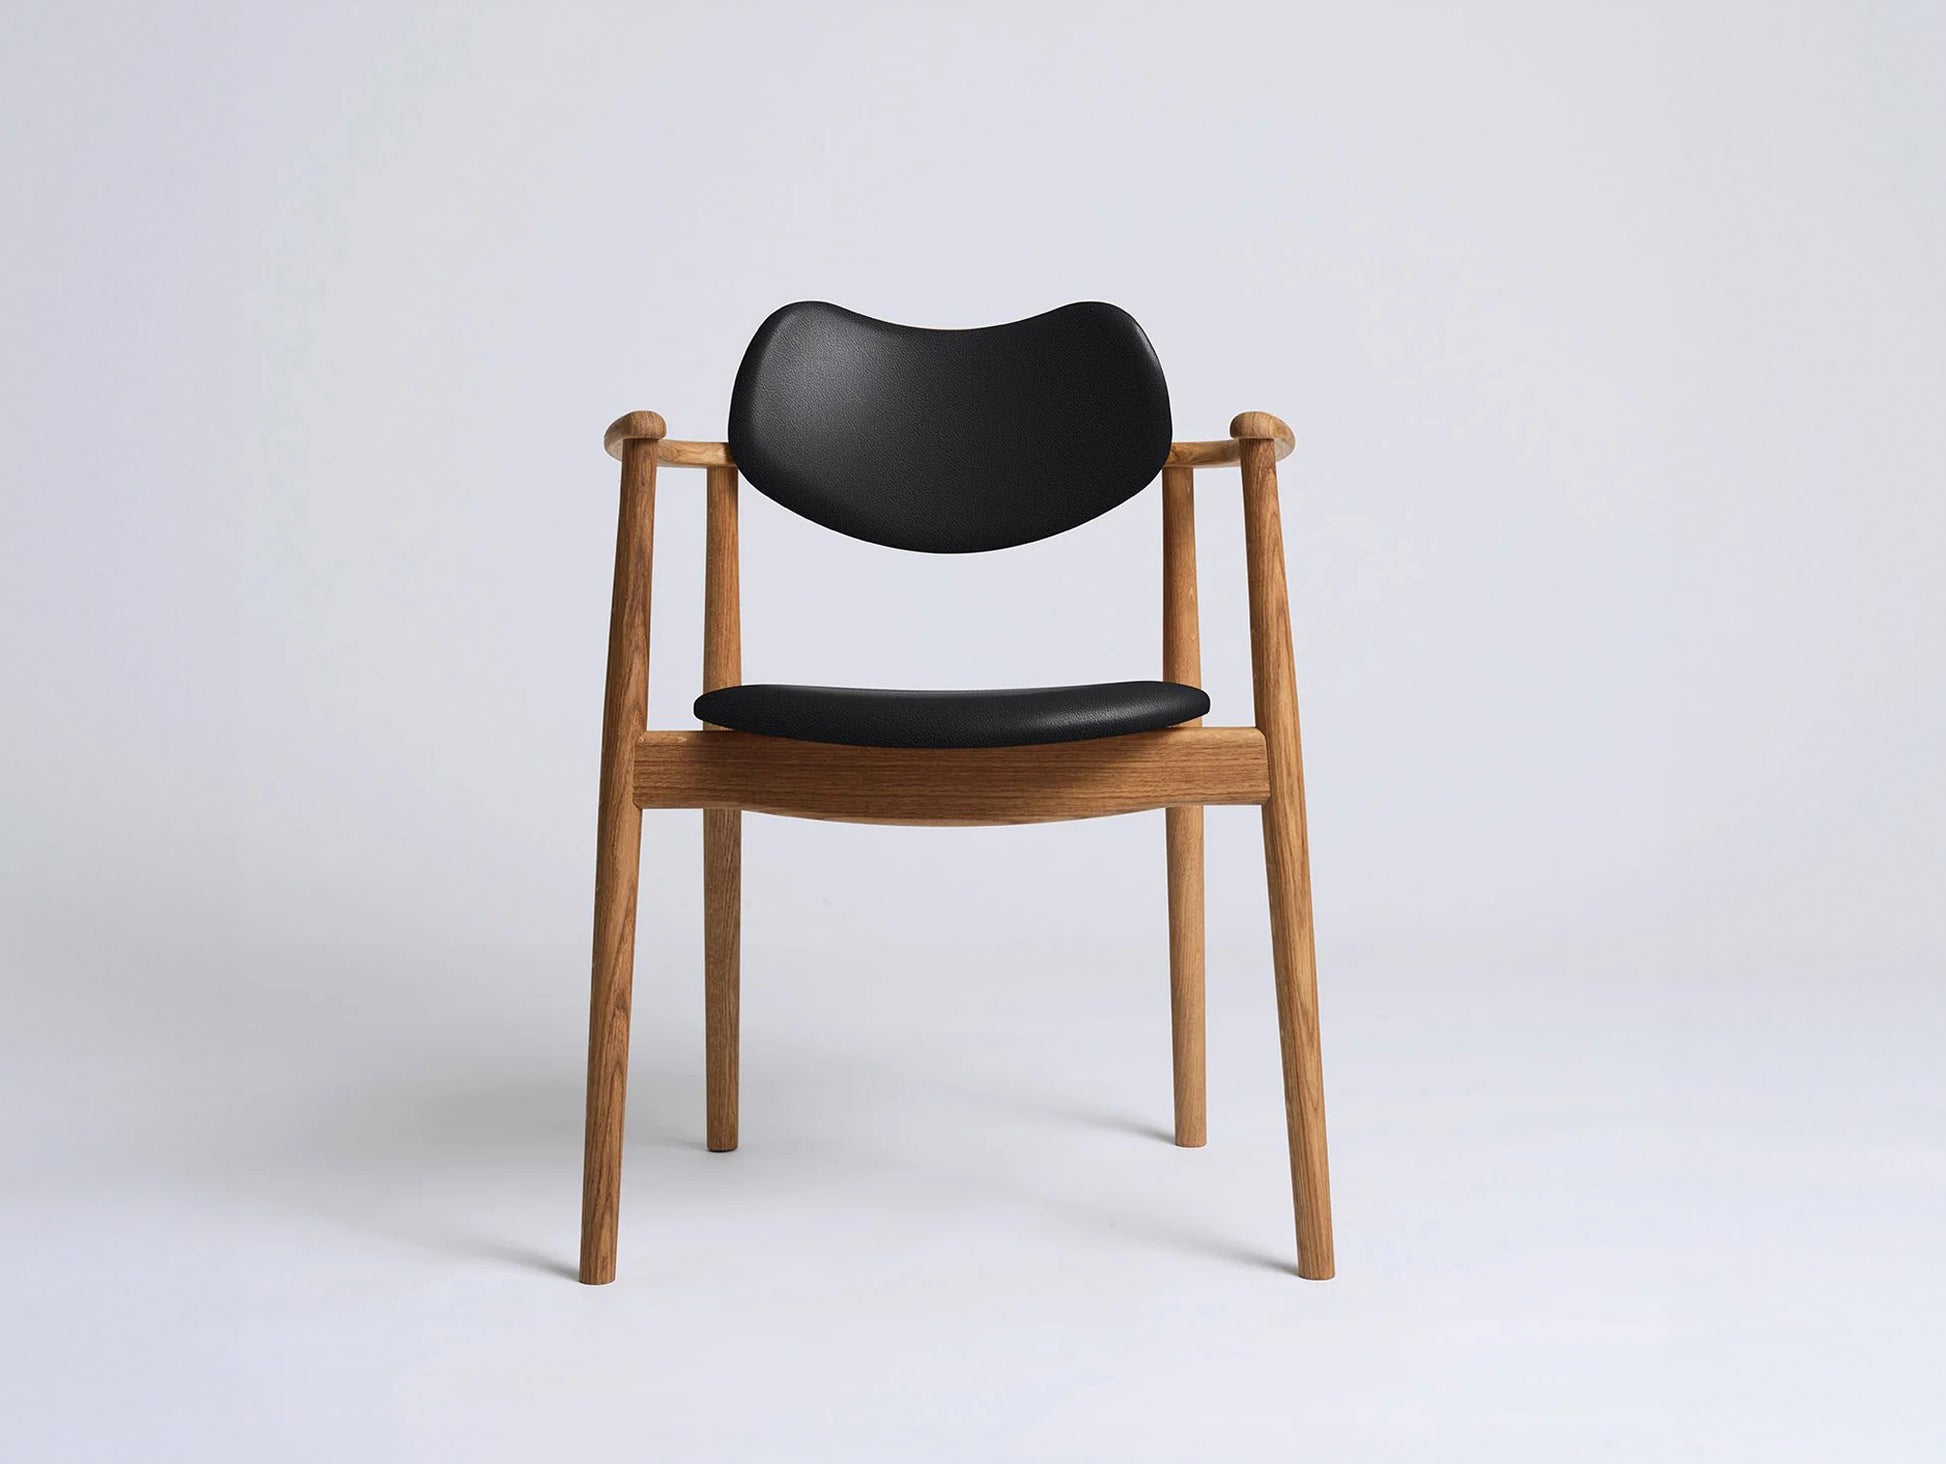 Regatta Chair Seat and Back Upholstered by Ro Collection - Oiled Oak / Exclusive Black Leather